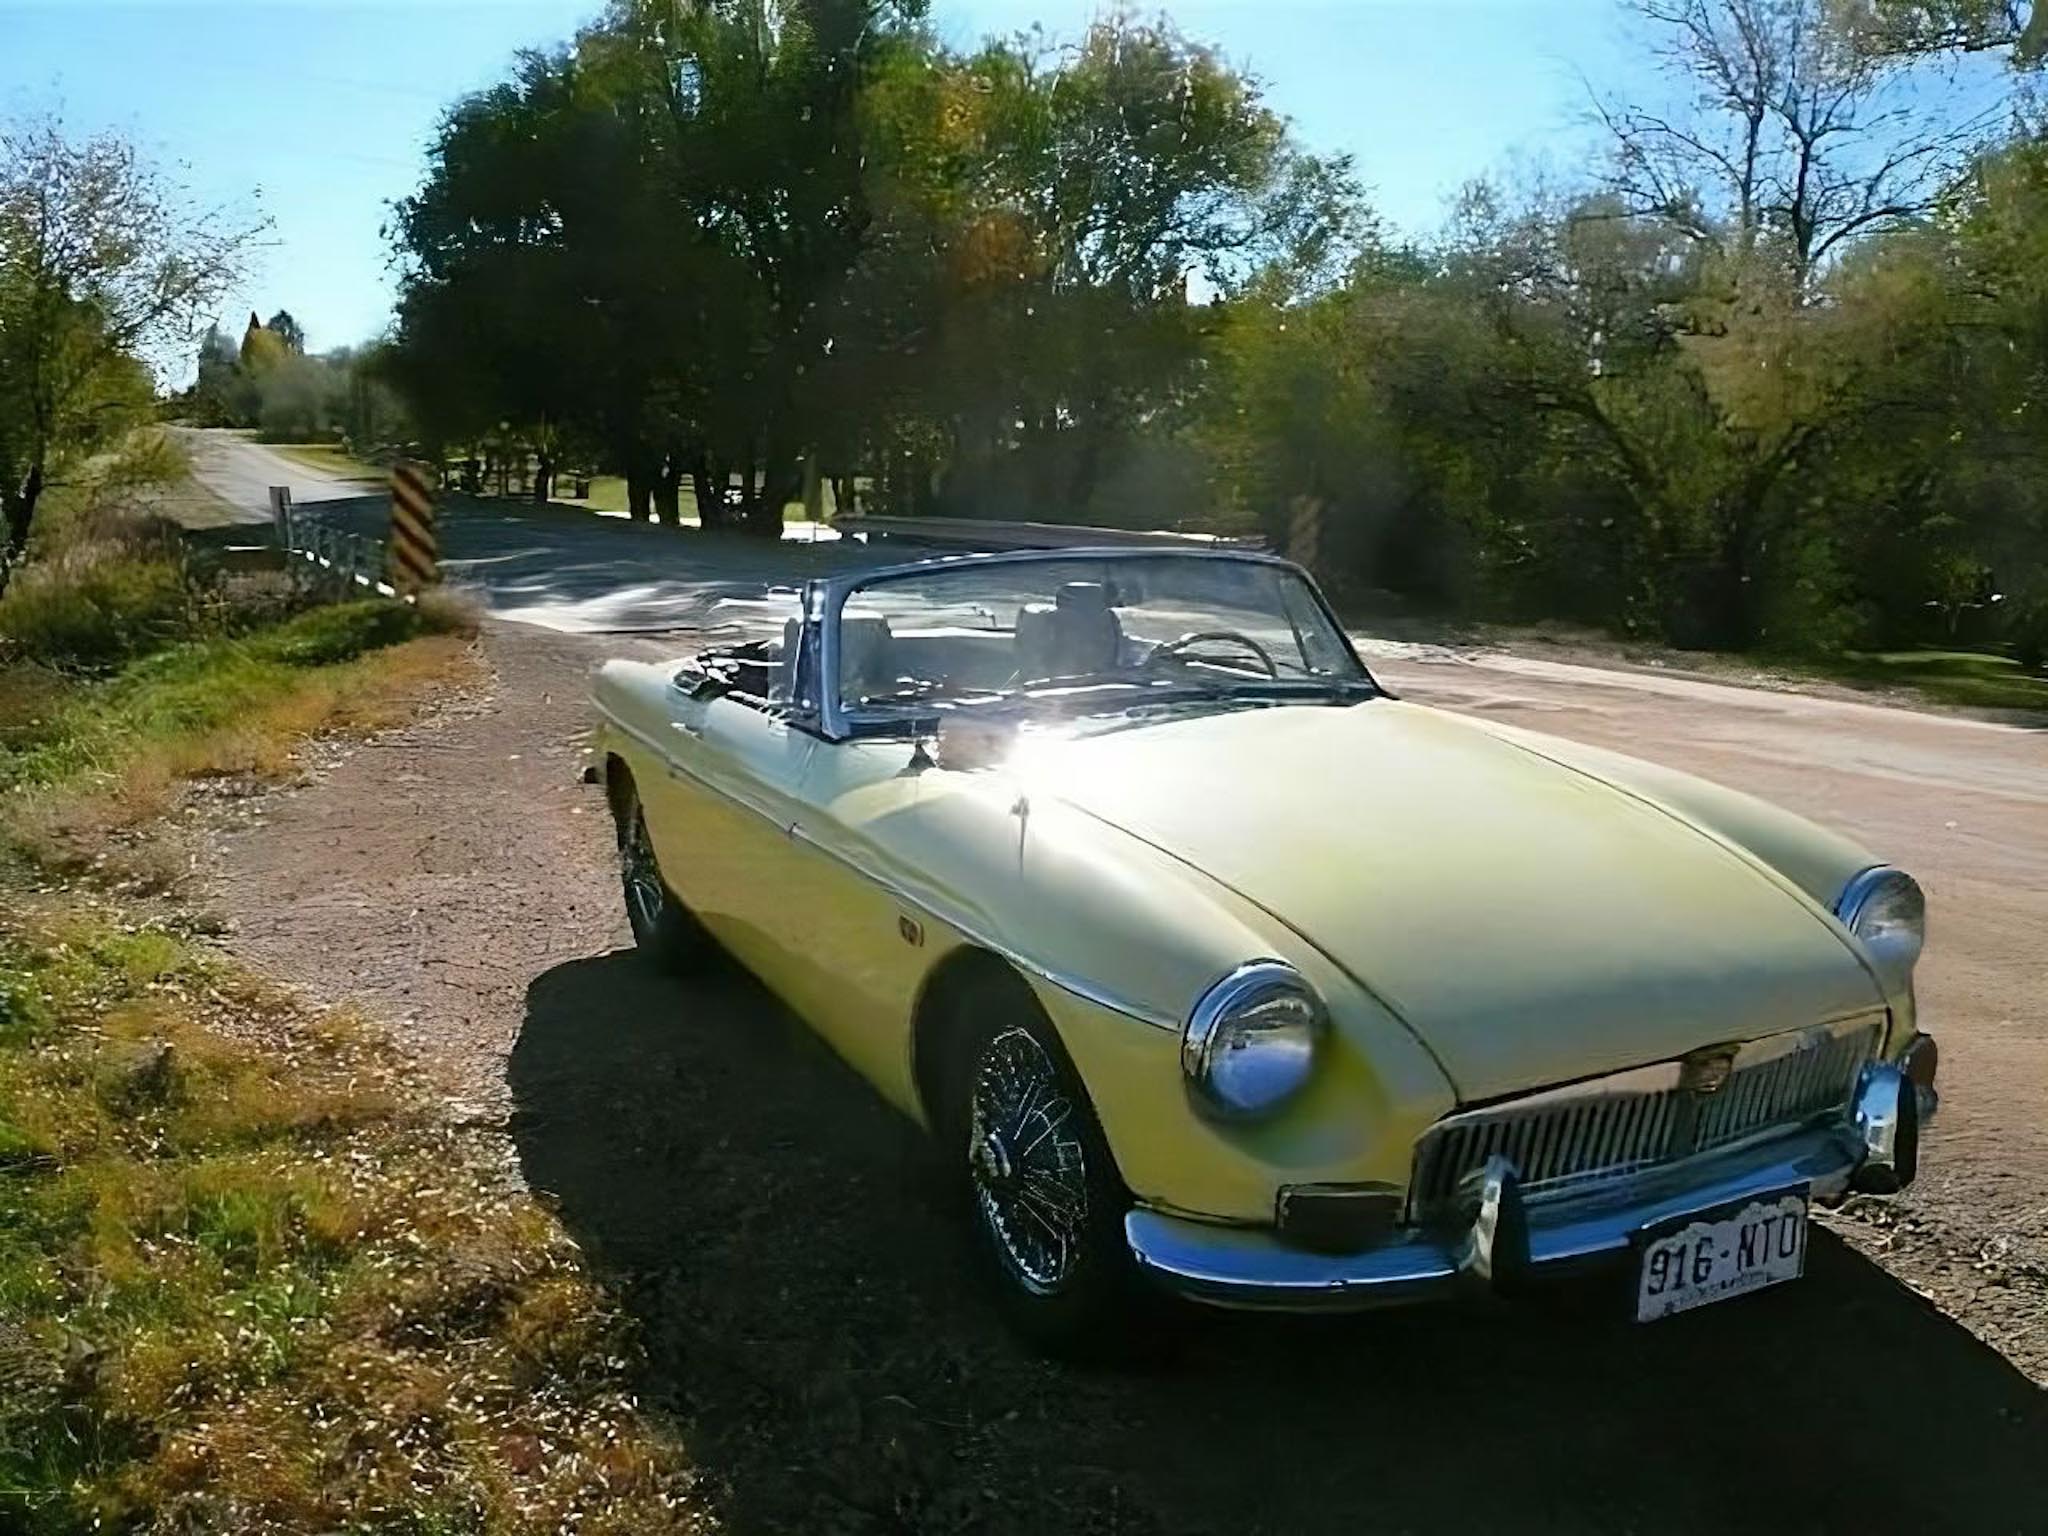 [November 1, 2007] The last dance, on some of the dirt backroads near home. A week later I sold the MGB that I owned for 12 years.